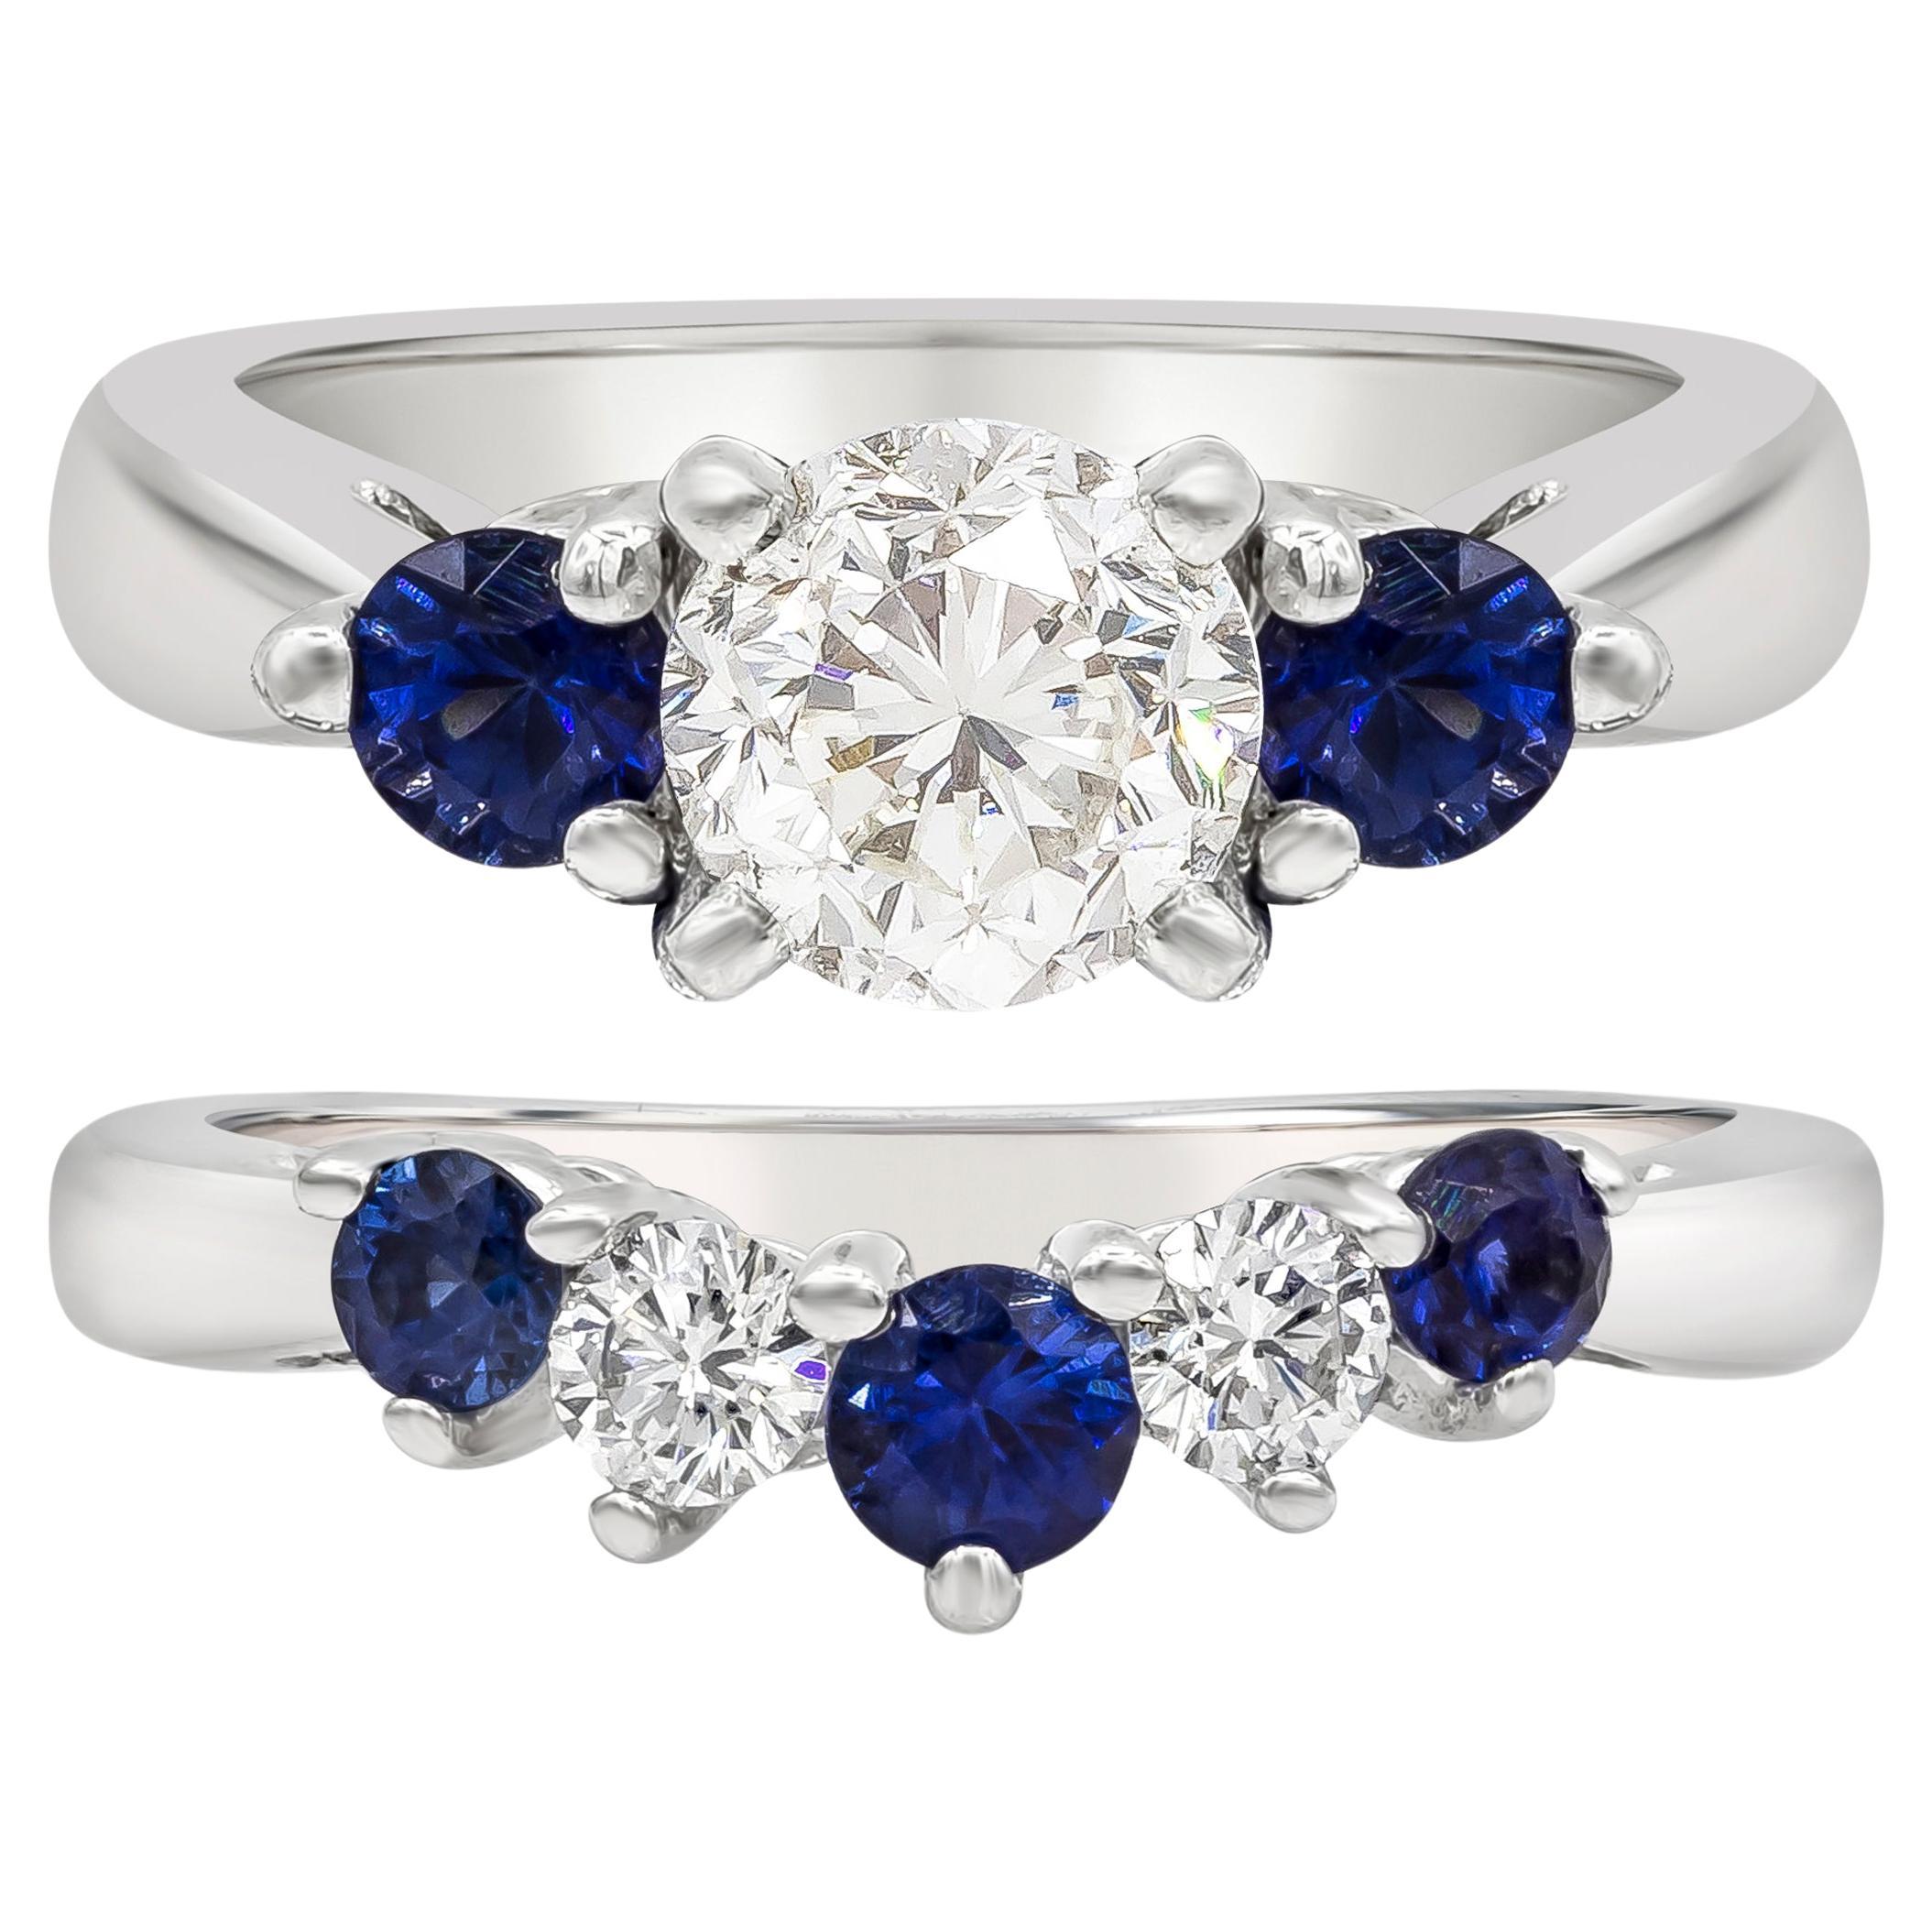 1.89 Carats Total Diamond and Blue Sapphire Wedding Band and Engagement Ring Set For Sale